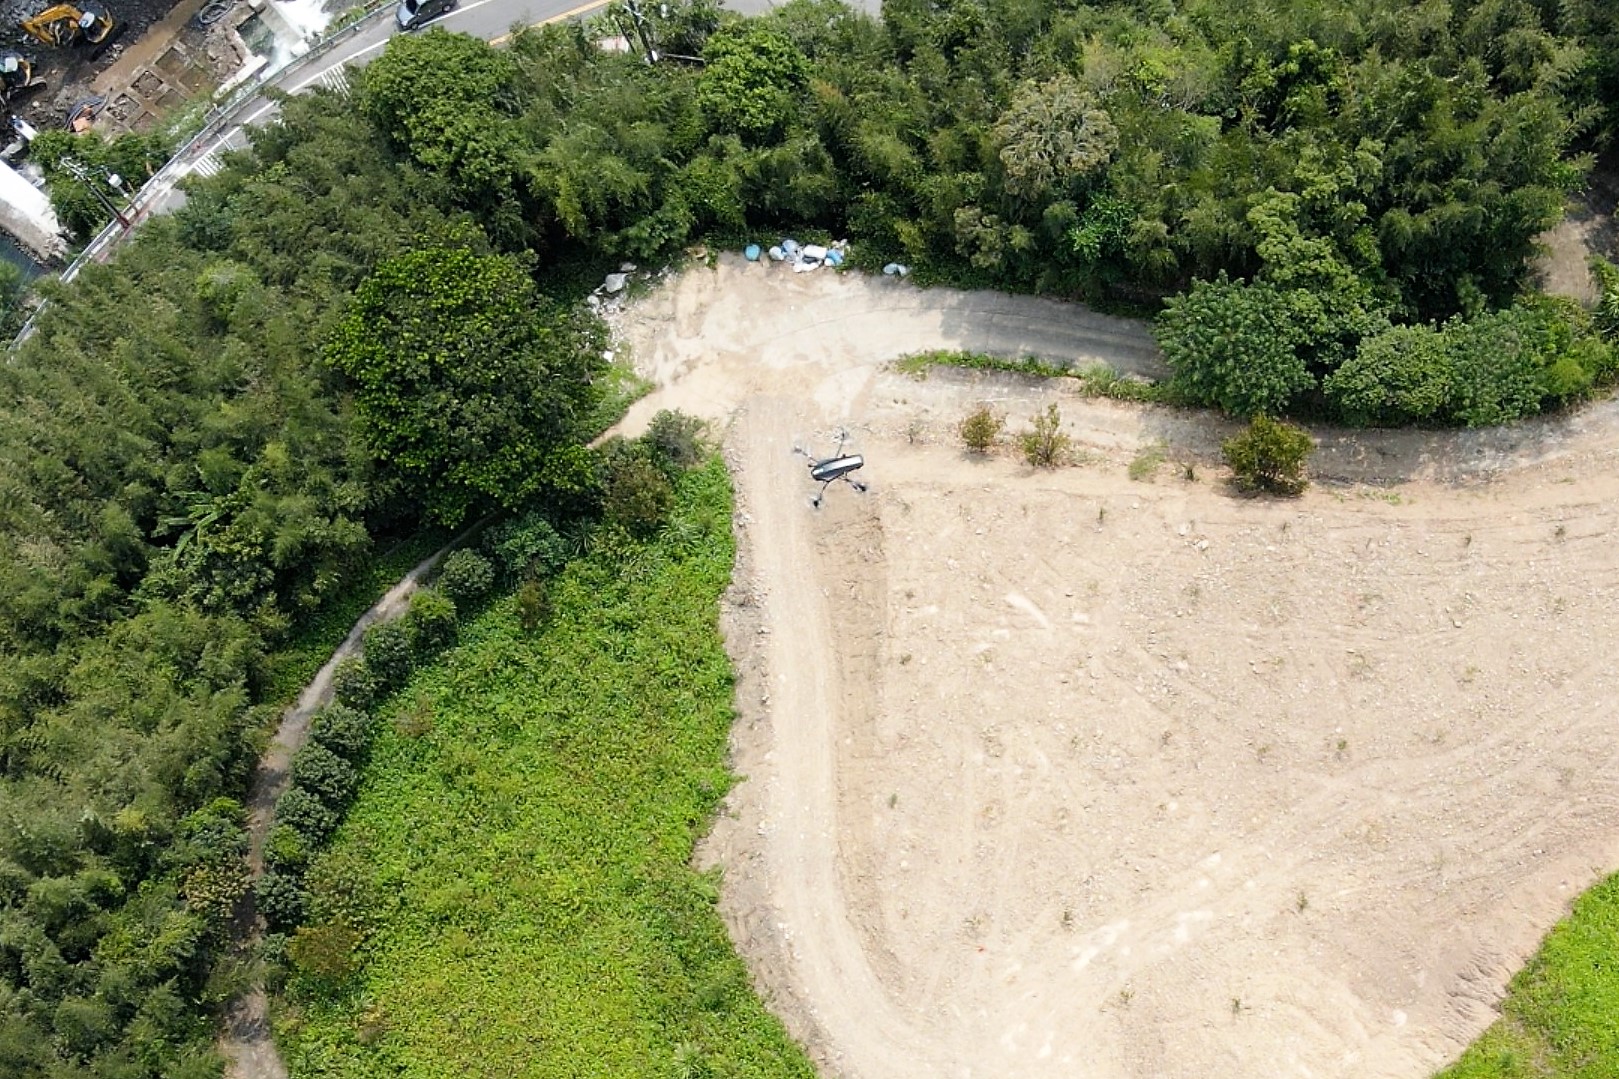 A drone flies over cleared land.